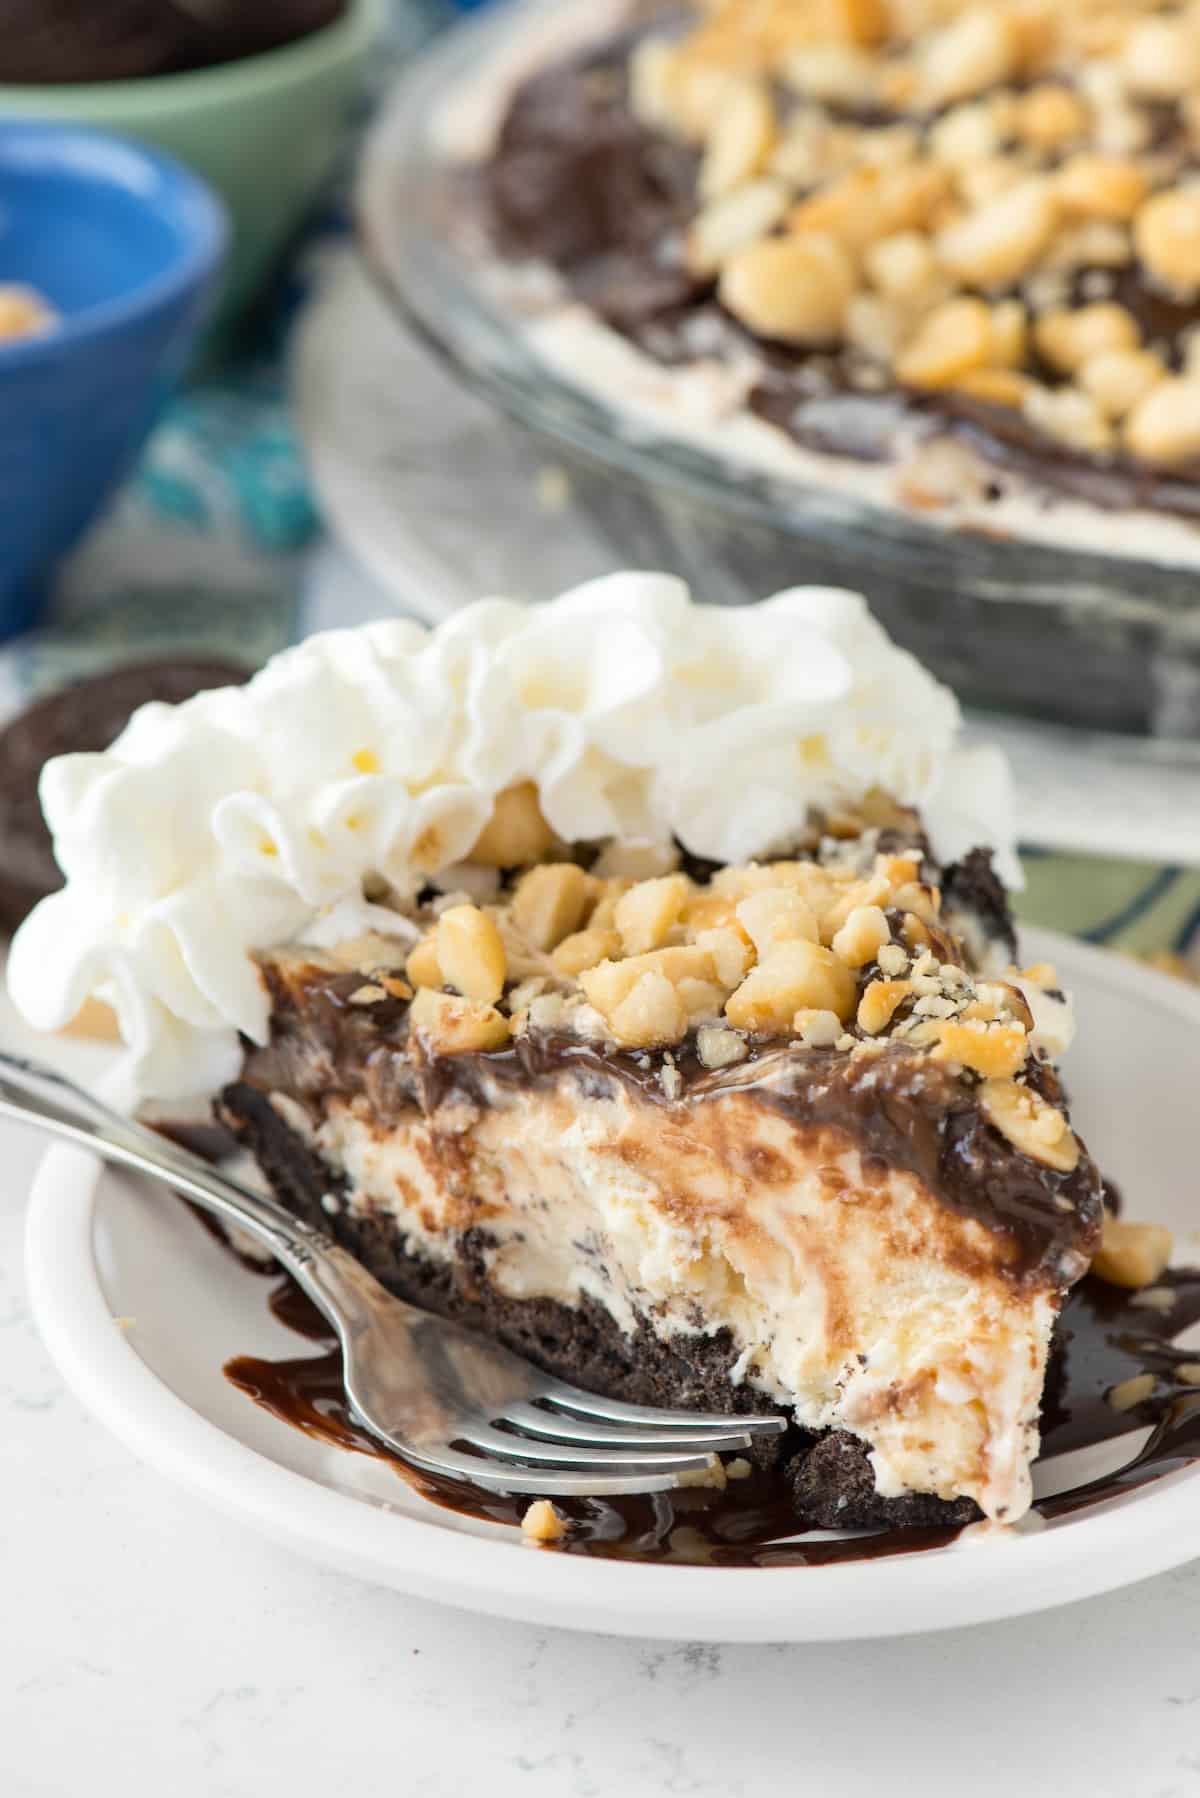 one slice of ice cream pie with chocolate sauce and macadamia nuts on top.